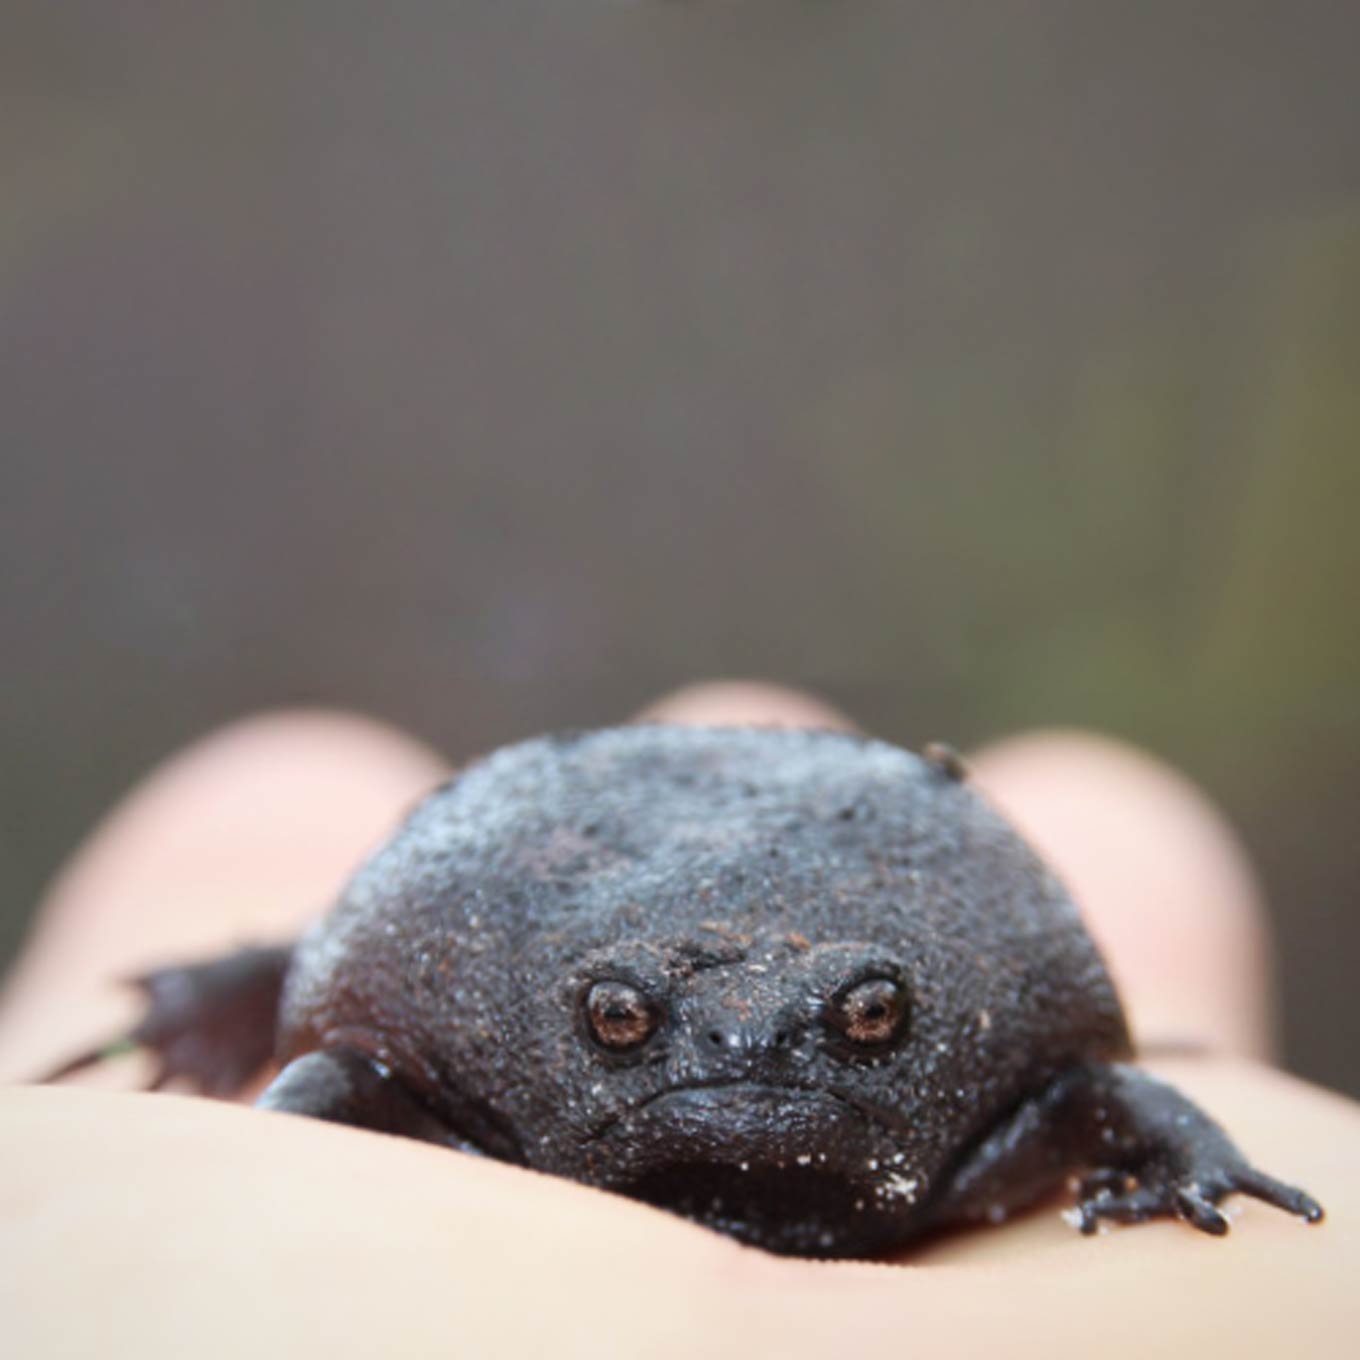 A small frowning black rain frog in someone's hand